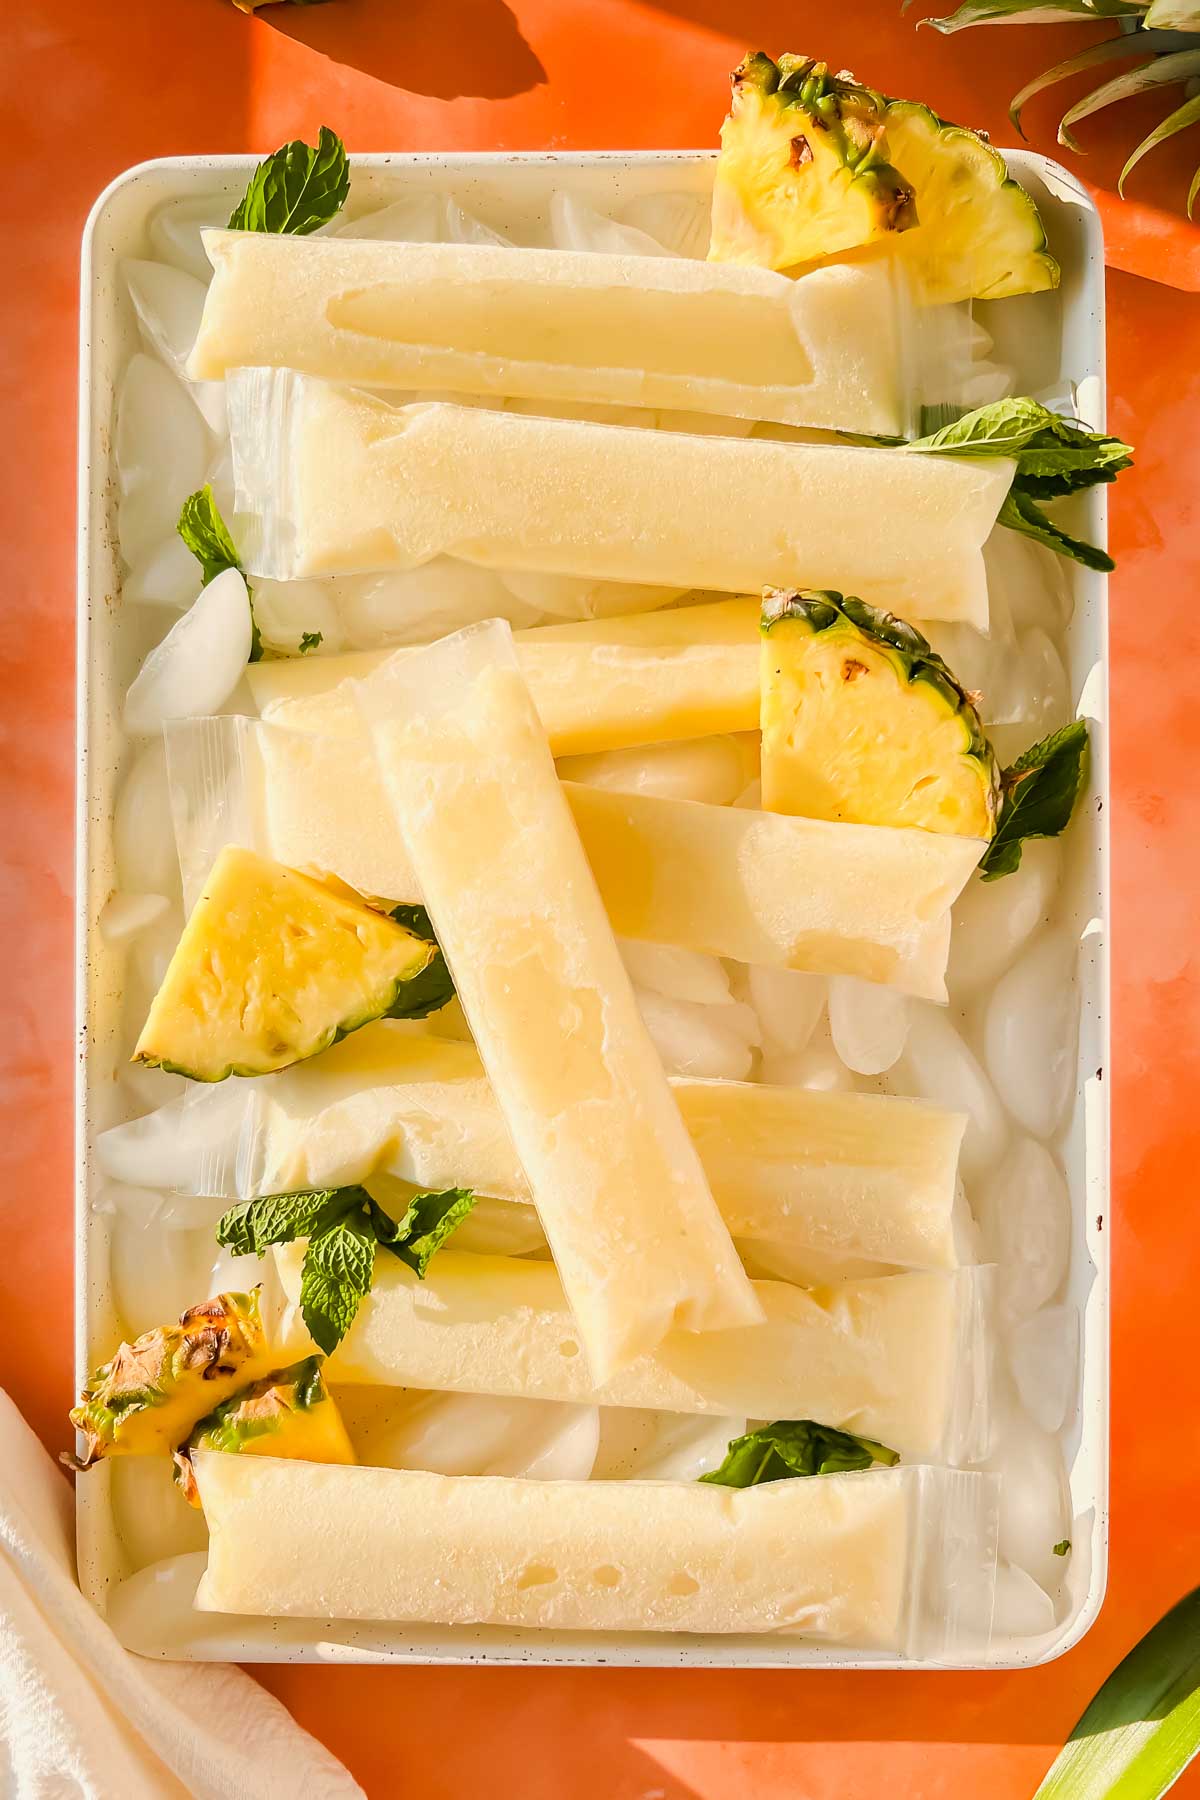 Pina colada ice pops on white tray filled with ice surrounded by pineapple slices.